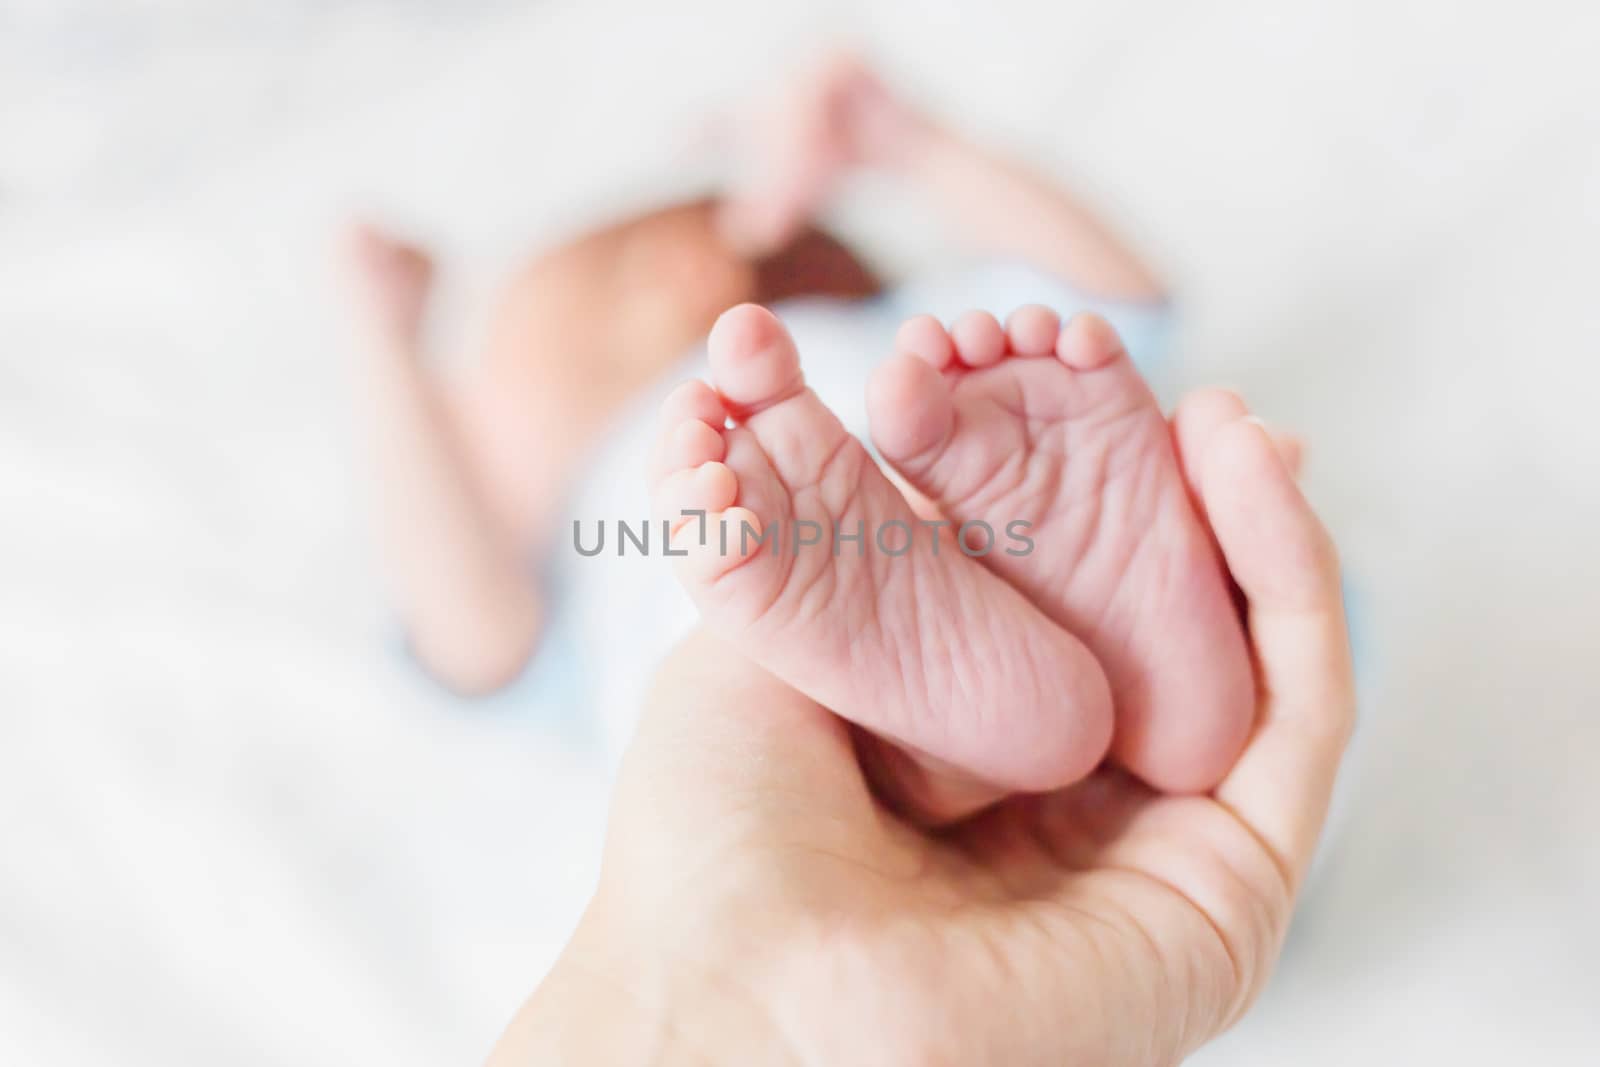 Mother holds newborn baby's bare heels. Tiny feet in woman's hand. Cozy morning at home.